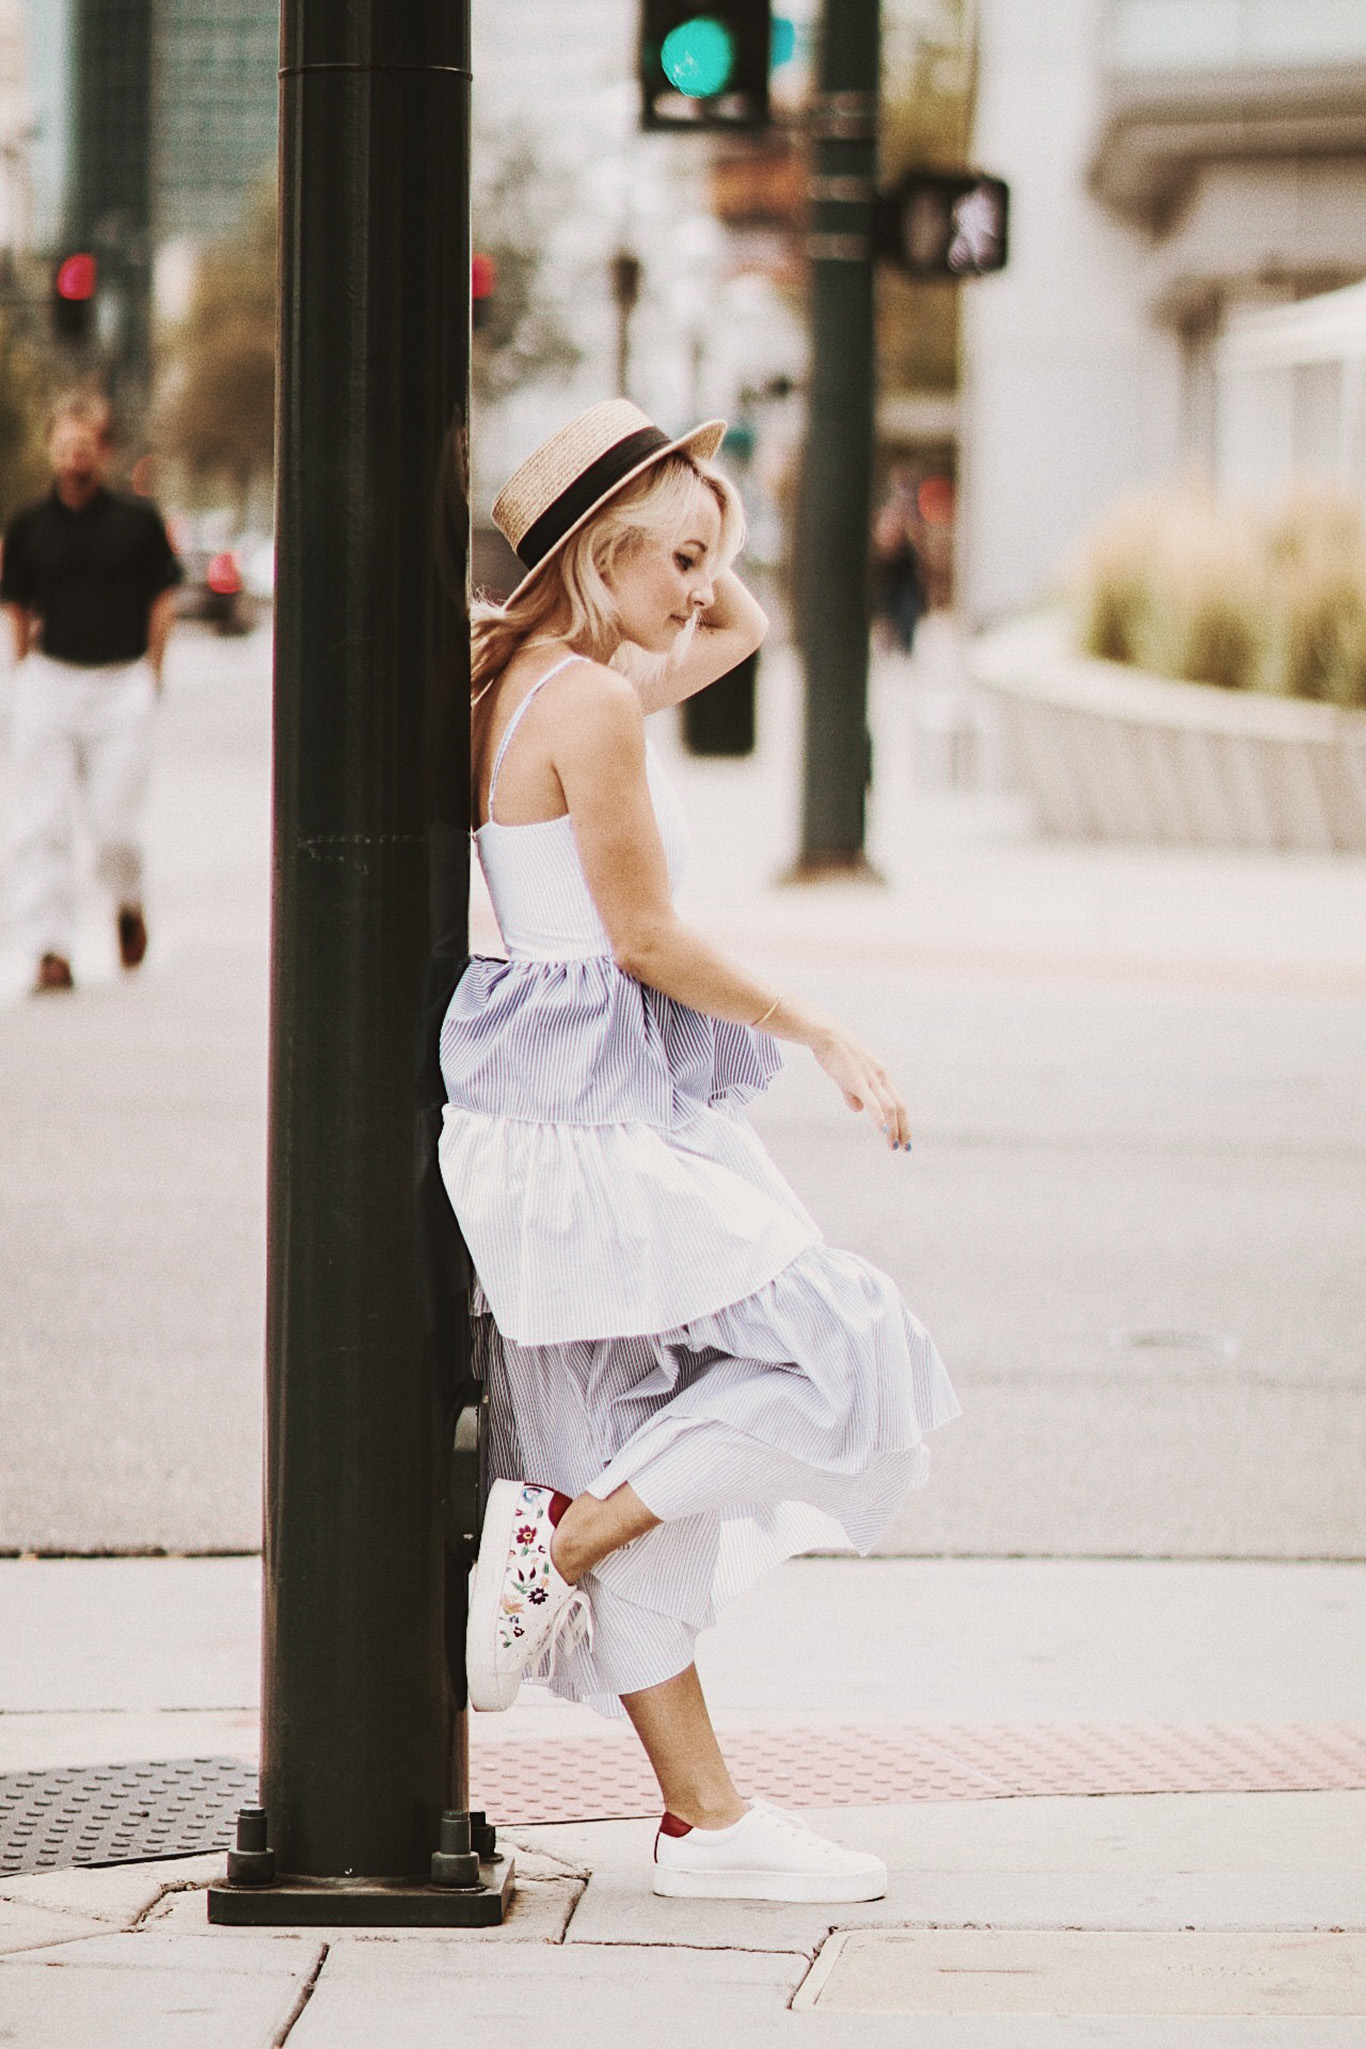 Alena Gidenko of modaprints.com styles a ruffle maxi dress from sheen and shares how to style it with tennis shoes